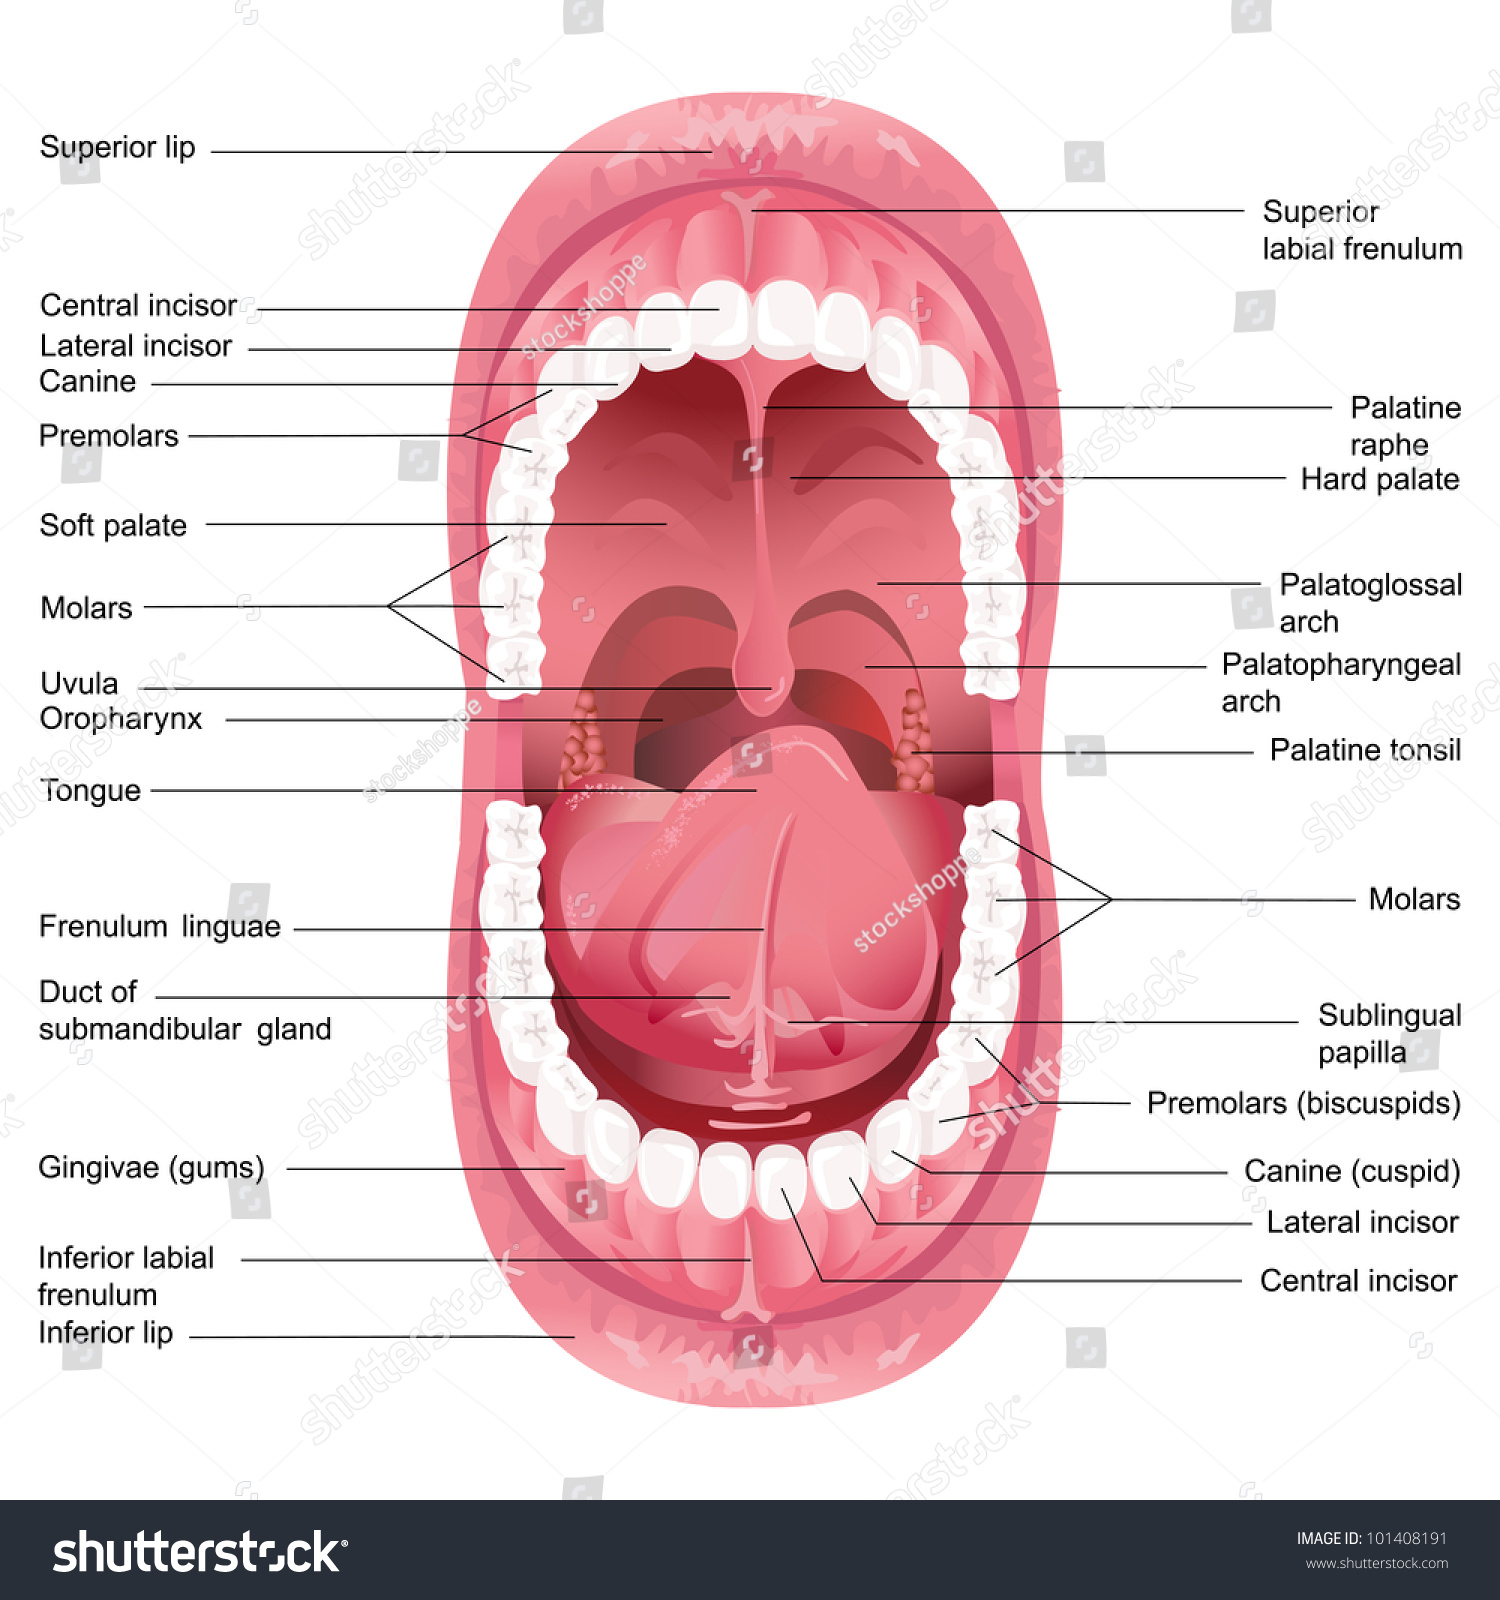 Diagram Of The Human Mouth 49